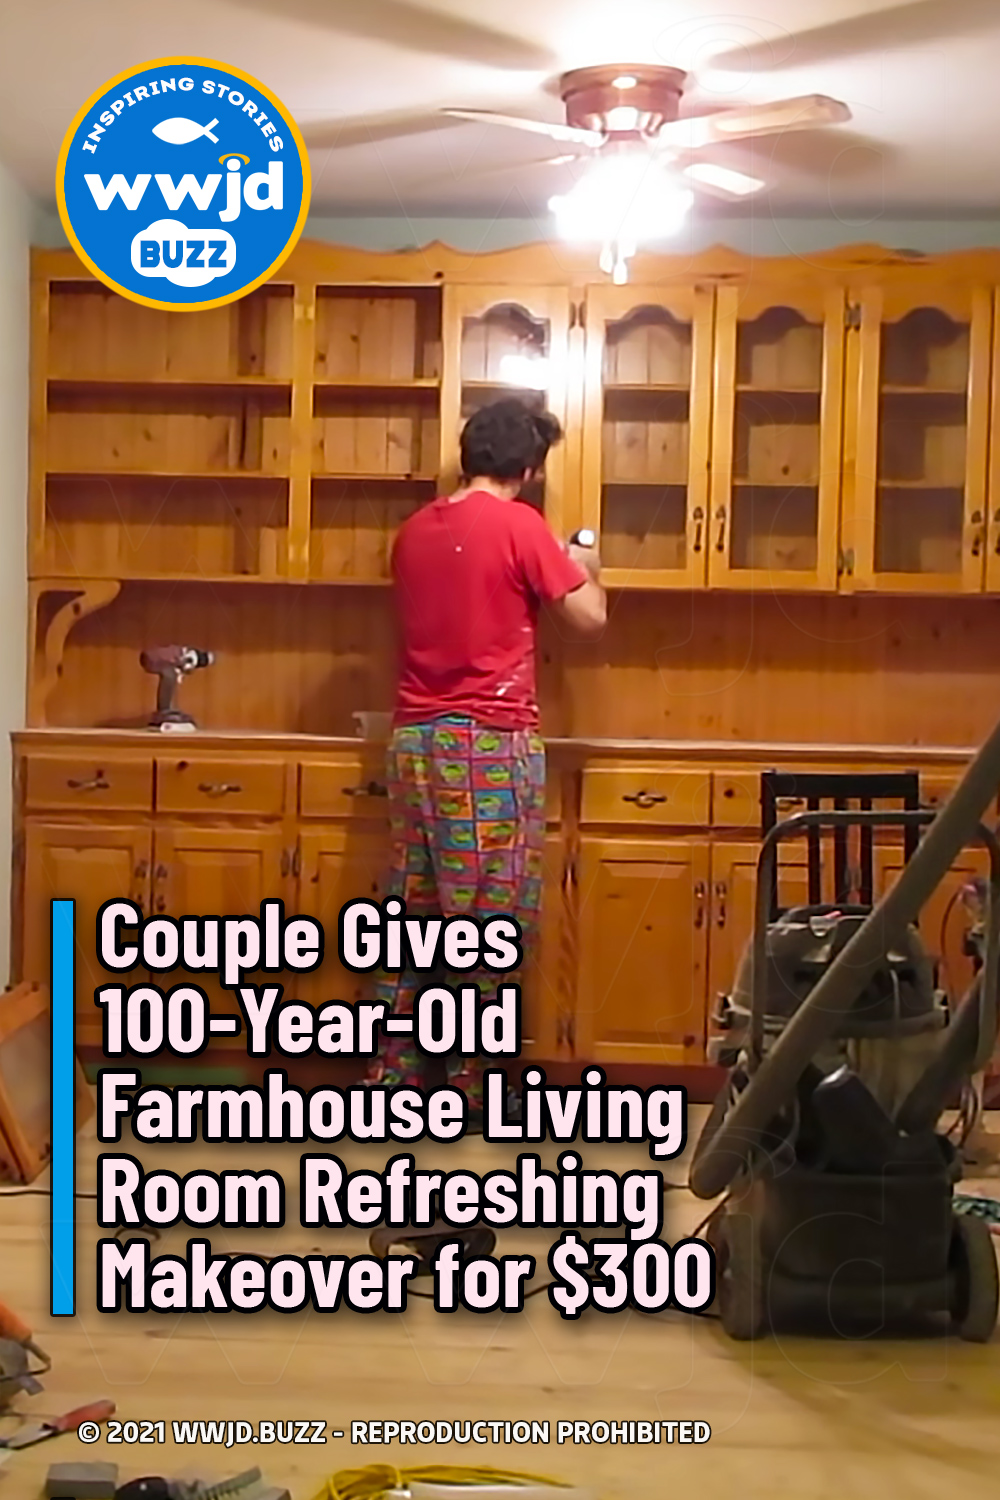 Couple Gives 100-Year-Old Farmhouse Living Room Refreshing Makeover for $300